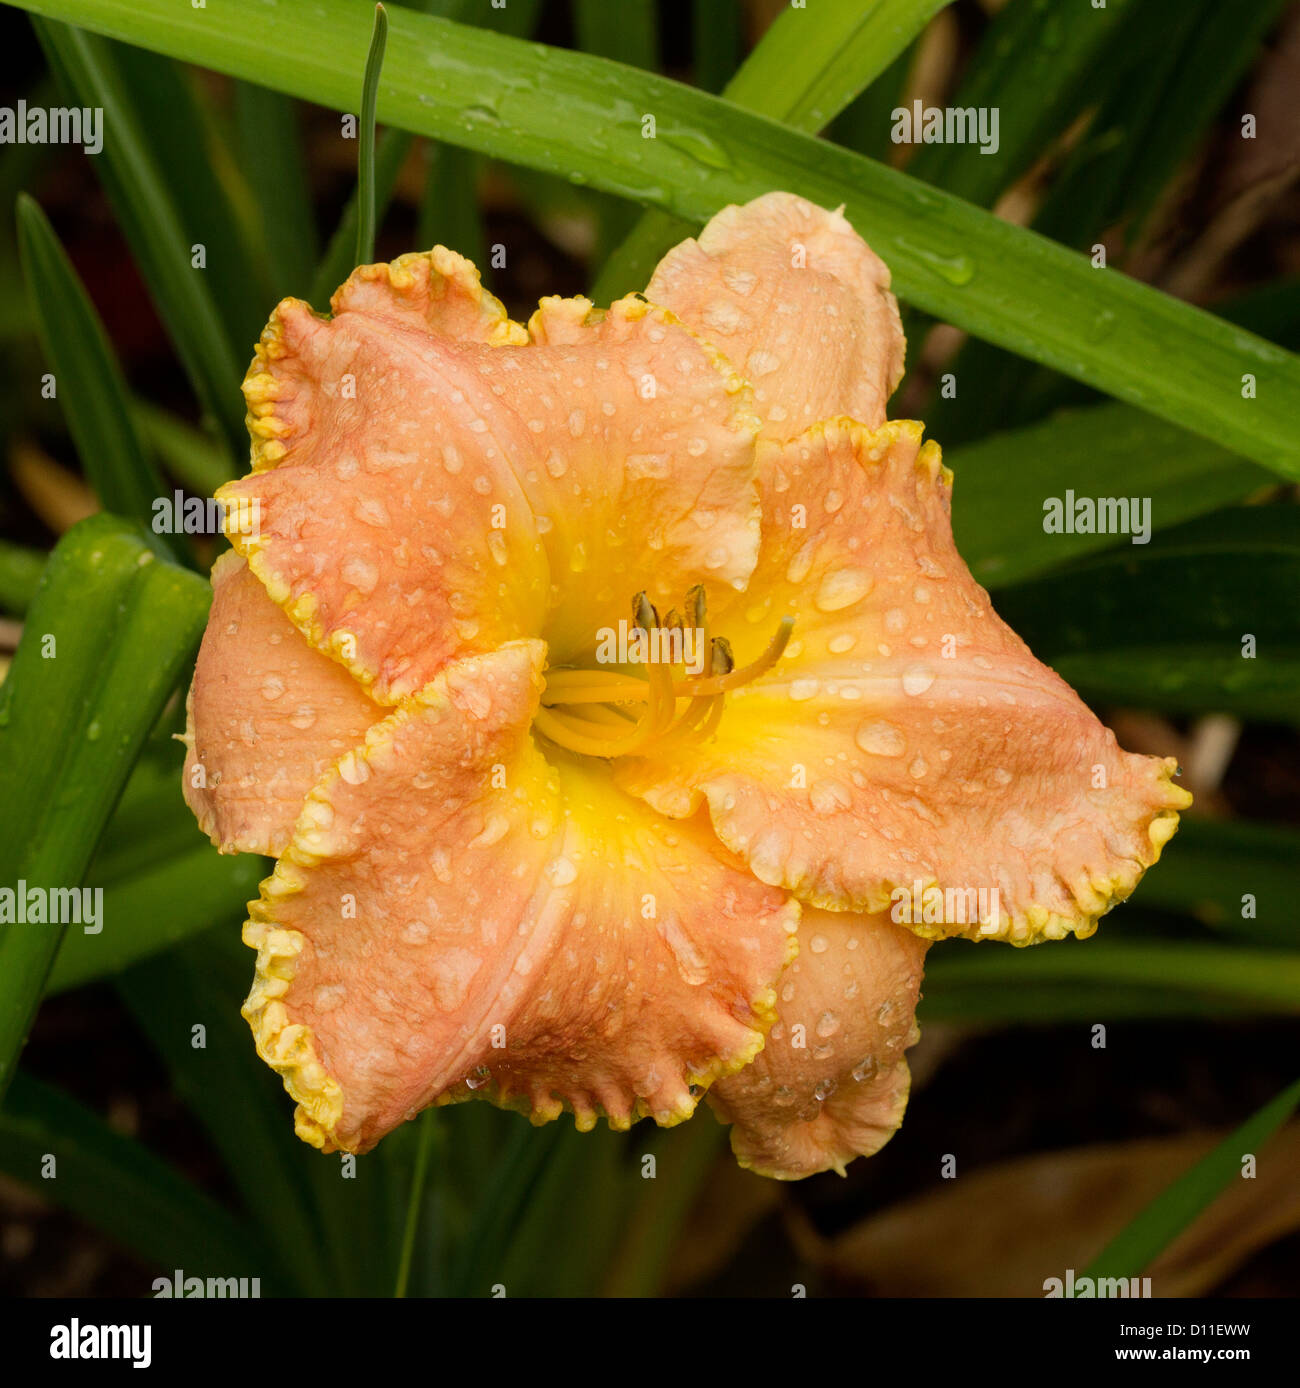 Apricot and yellow frilly edged flower of Hemerocallis 'Rushing Delight'  - daylily -with raindrops on petals and foliage Stock Photo